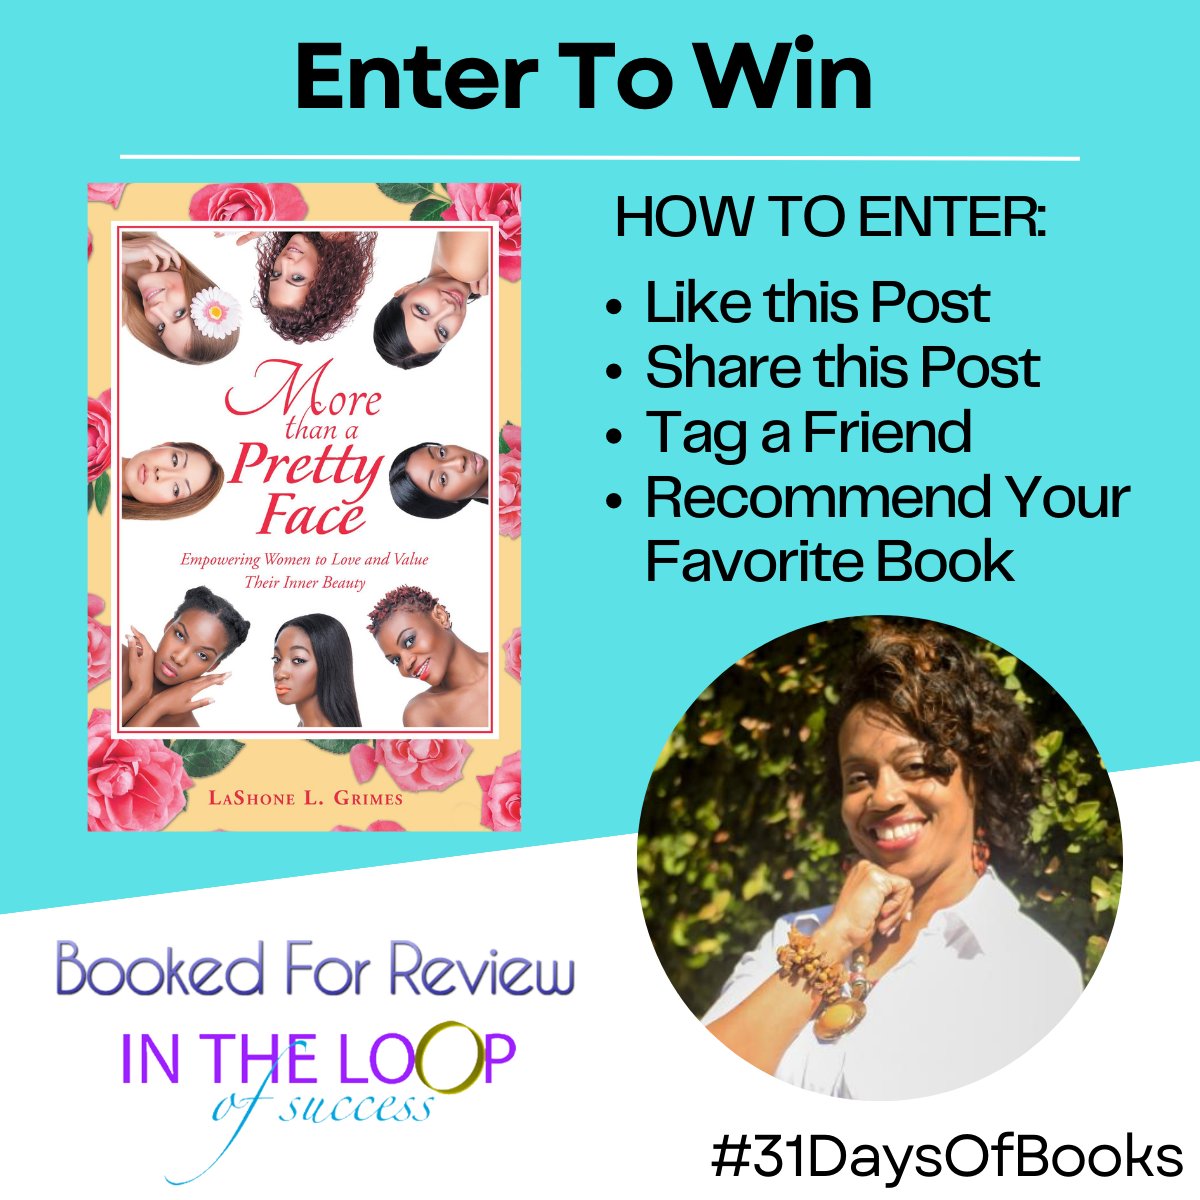 Today we hear from LaShone Grimes!! Have you ever read her recommendation?

Enter to win the book, More Than a Pretty Face: Empowering Women to Love and Value Their Inner Beauty !! The winner will be announced on Sunday!! #31DaysOfBooks #ITLCelebrates https://t.co/8zcd315dh0